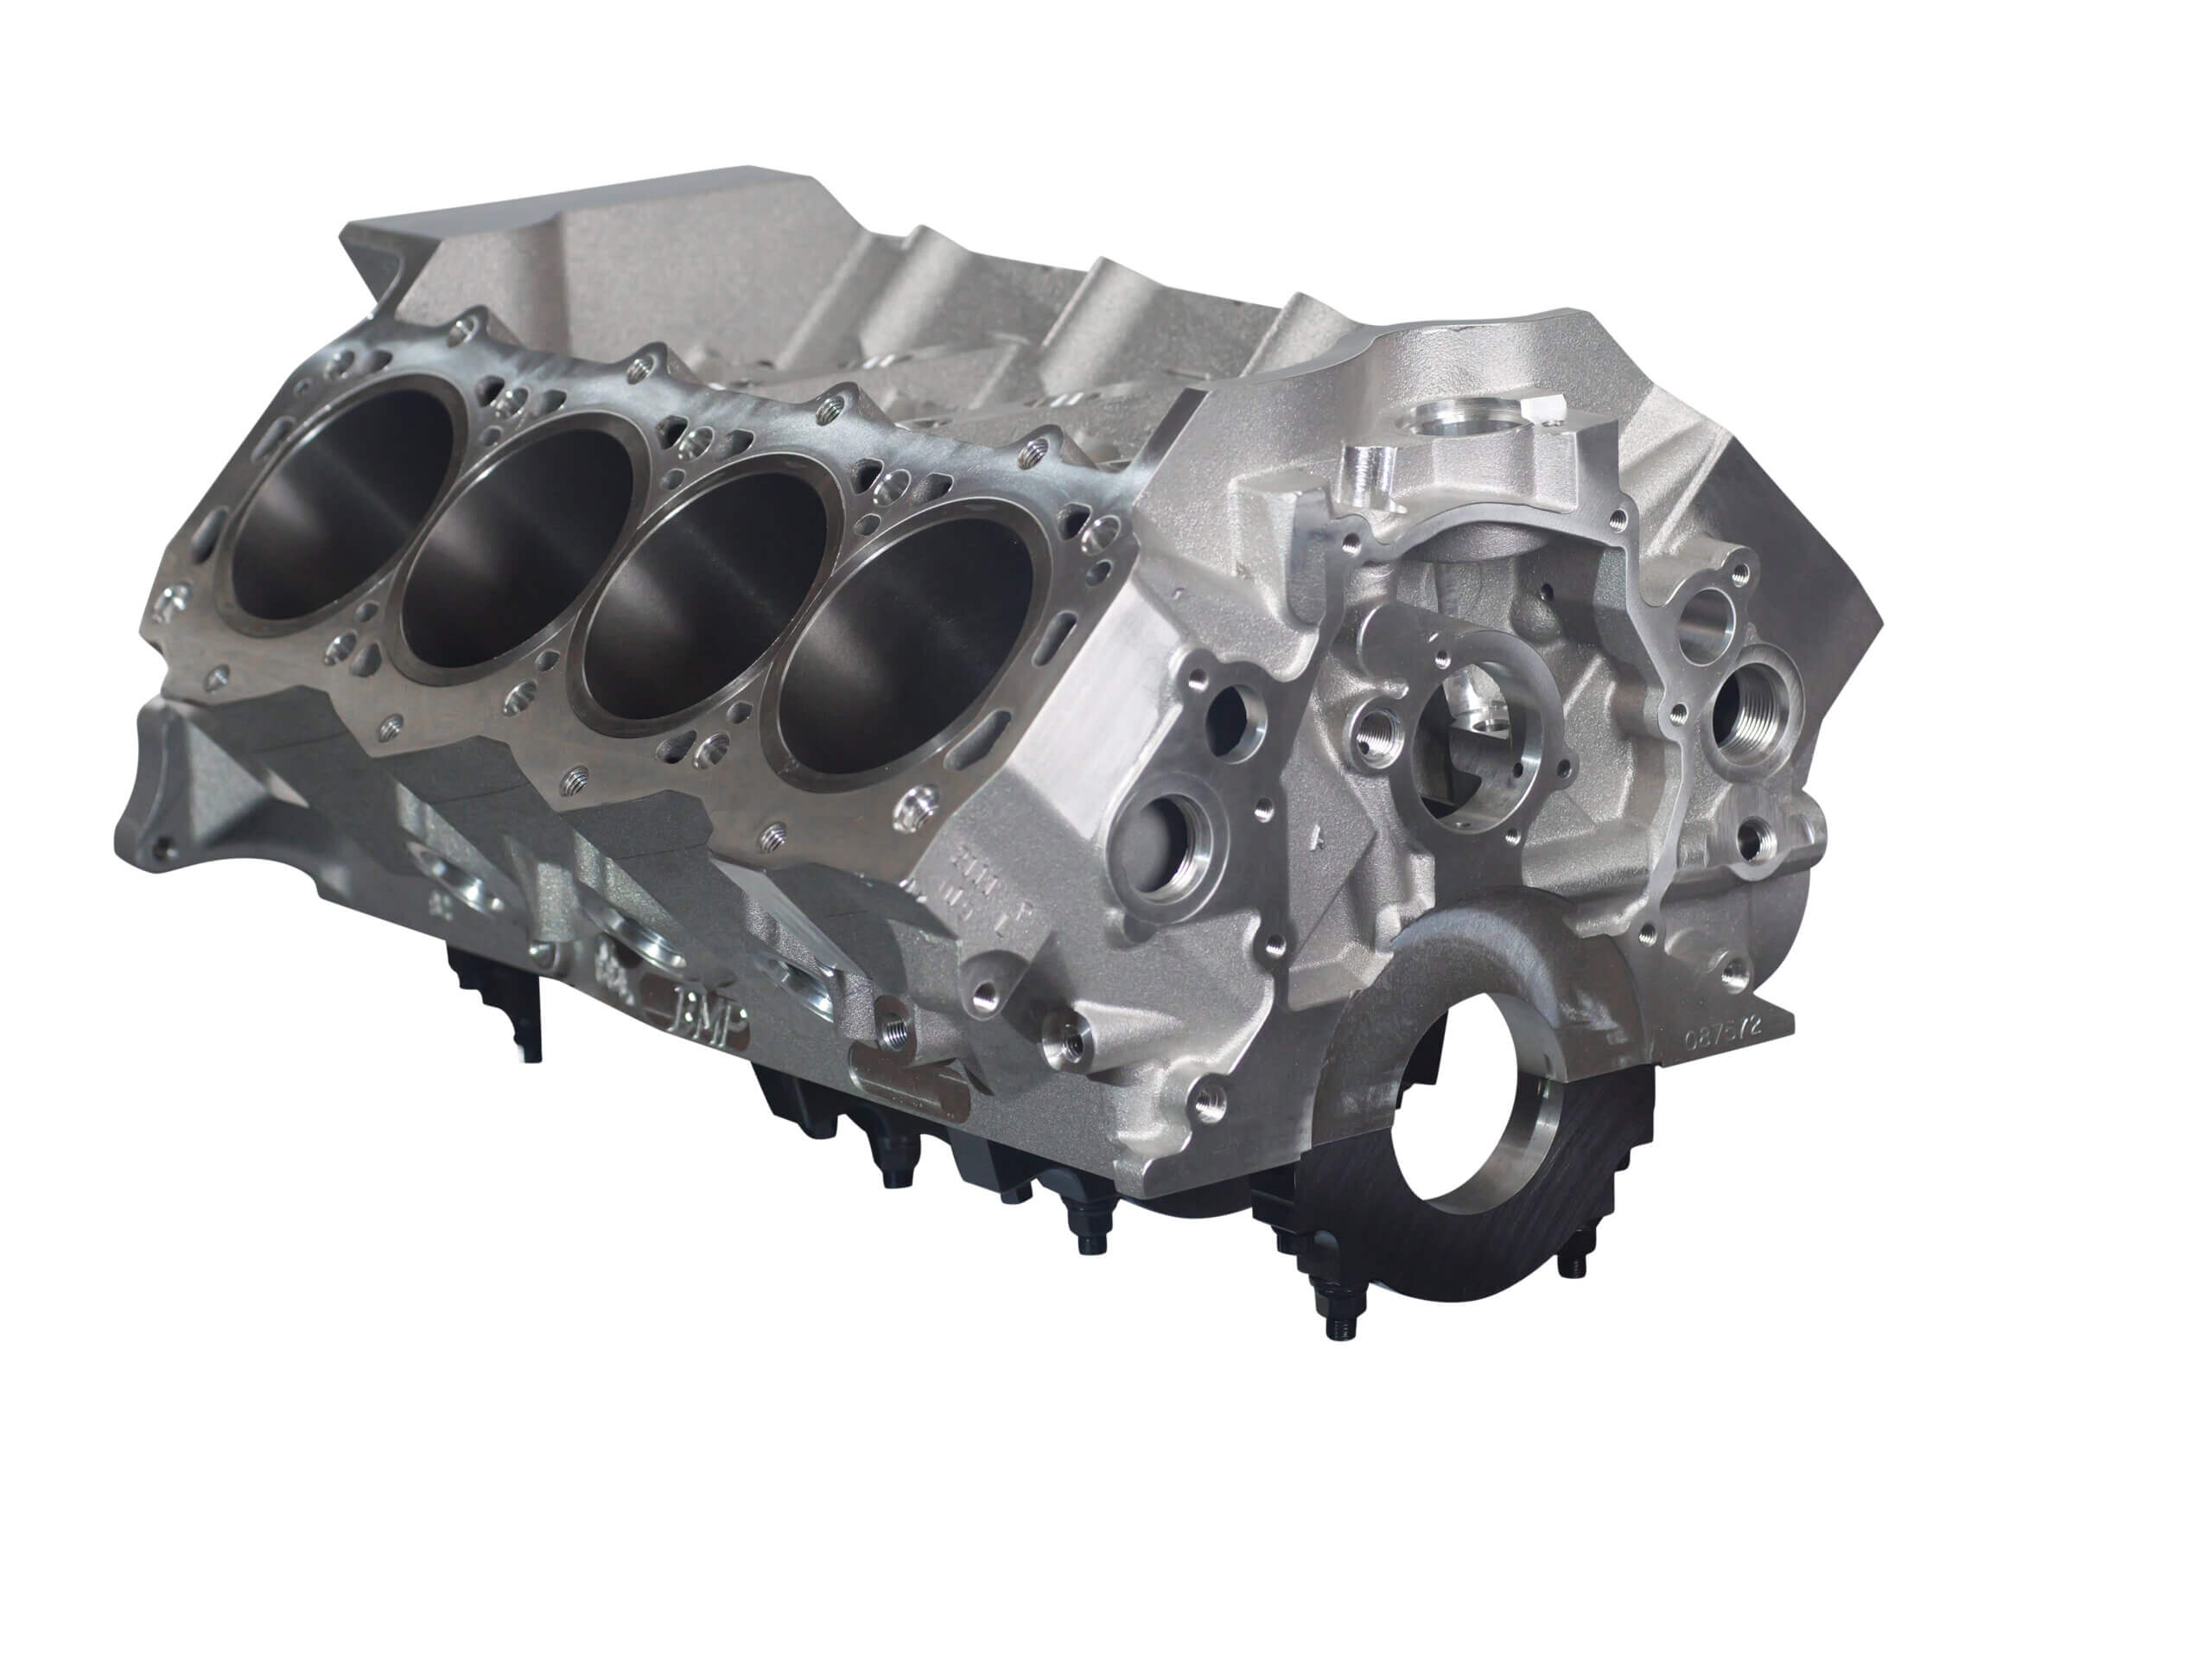 Bill Mitchell Products SBF 357T6 Aluminum Engine Block Ford Small Block 351 Mains, 9.500"Deck, 3.995" Bore. Standard Cam(includes, Screw in Freeze plugs, Cam plug, All dowel pins and Pipe plugs) 087572